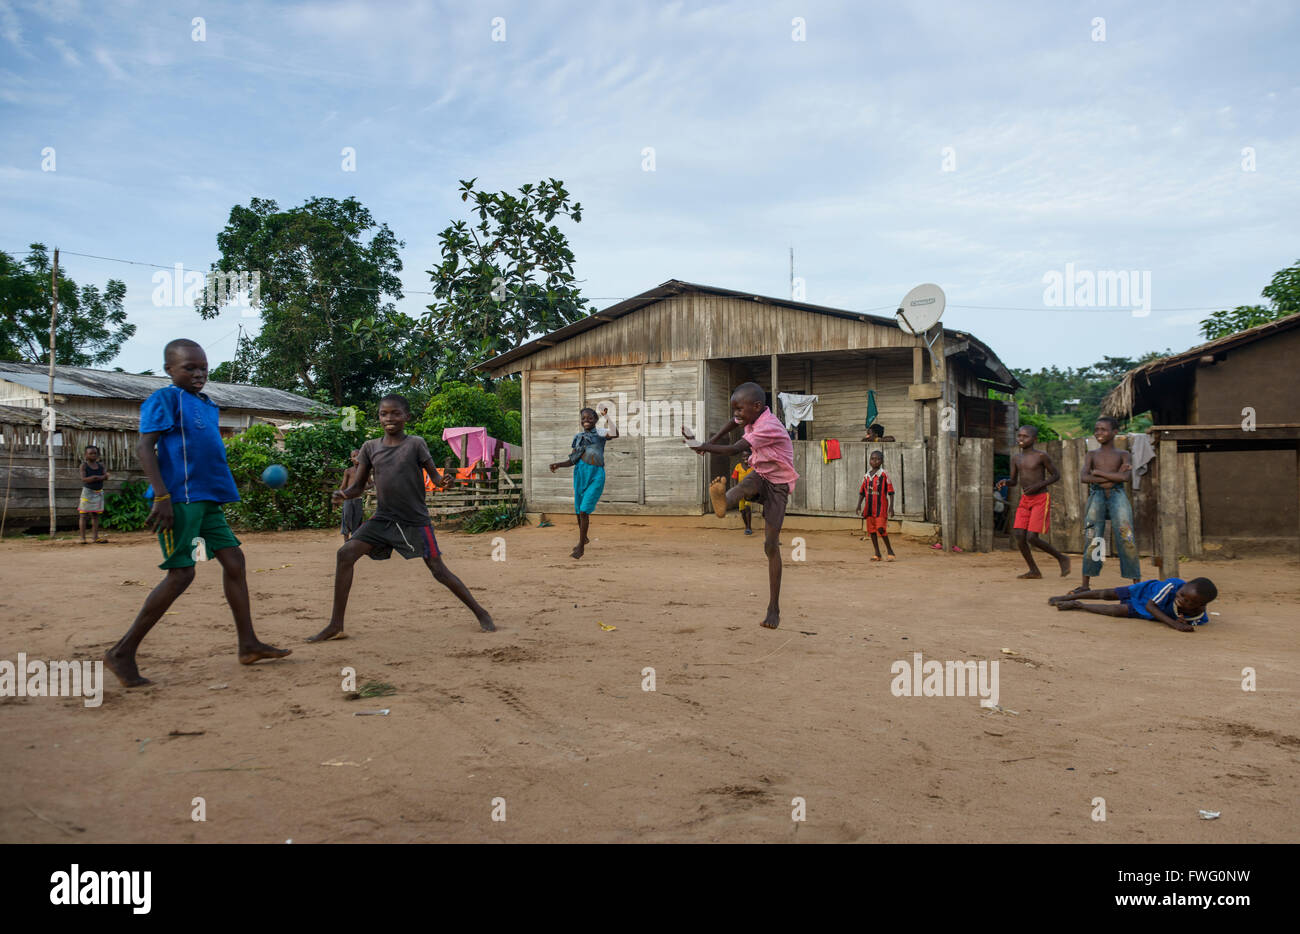 Street football in Bayanga, Central African Republic, Africa Stock Photo